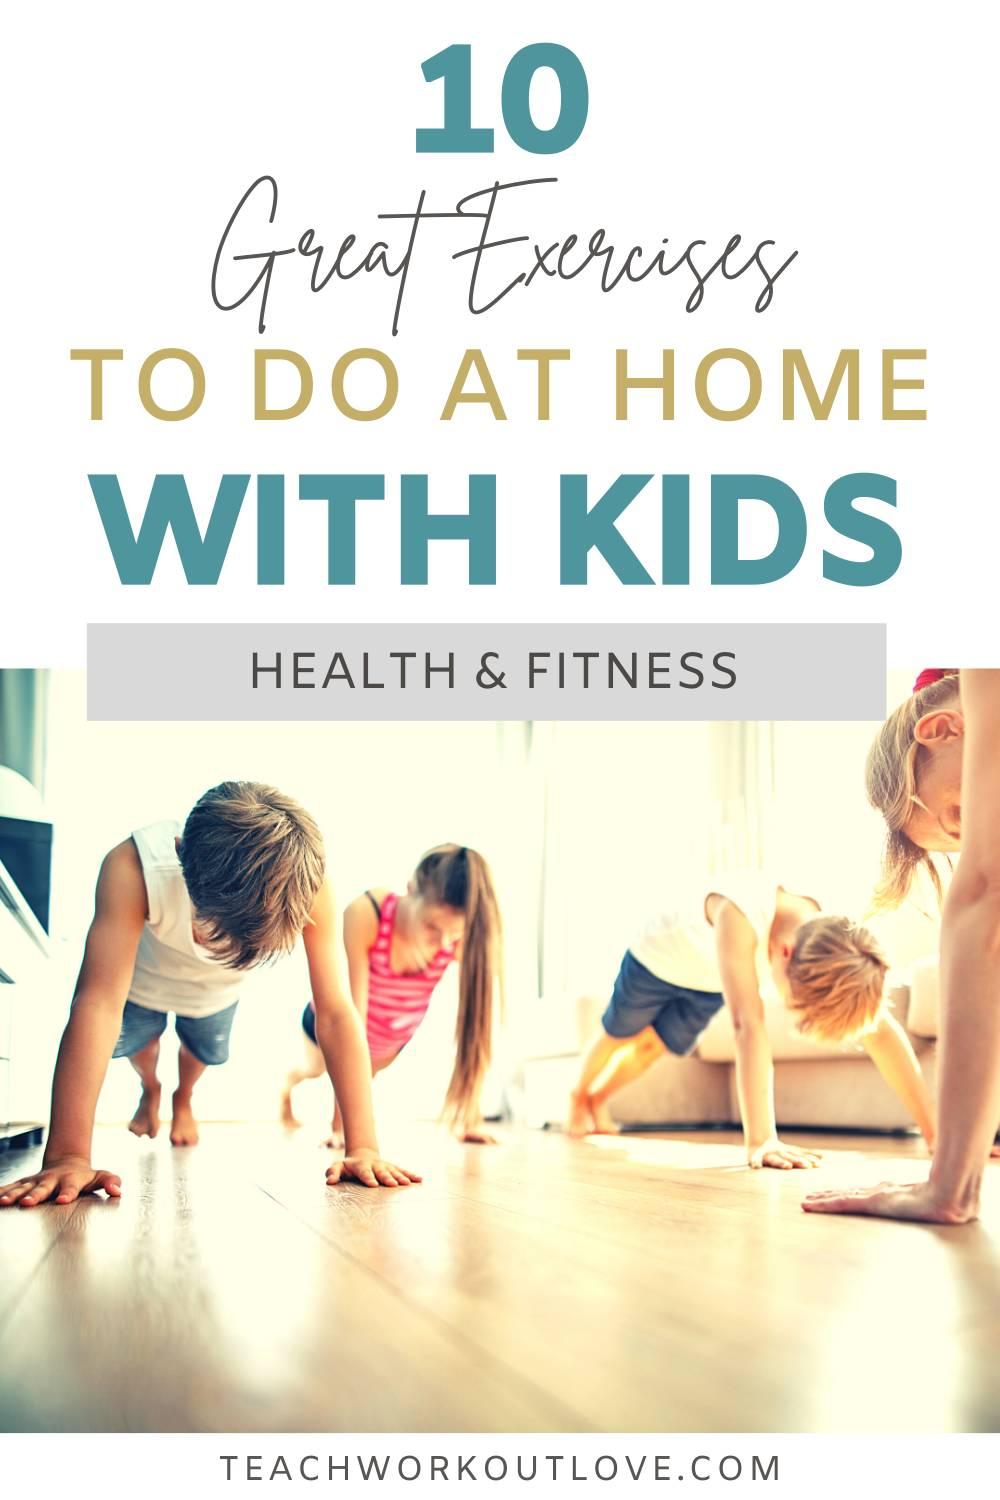 After being inside all winter, now is the time to get your kids to start exercising. Here are some fun exercises for kids to do at home.